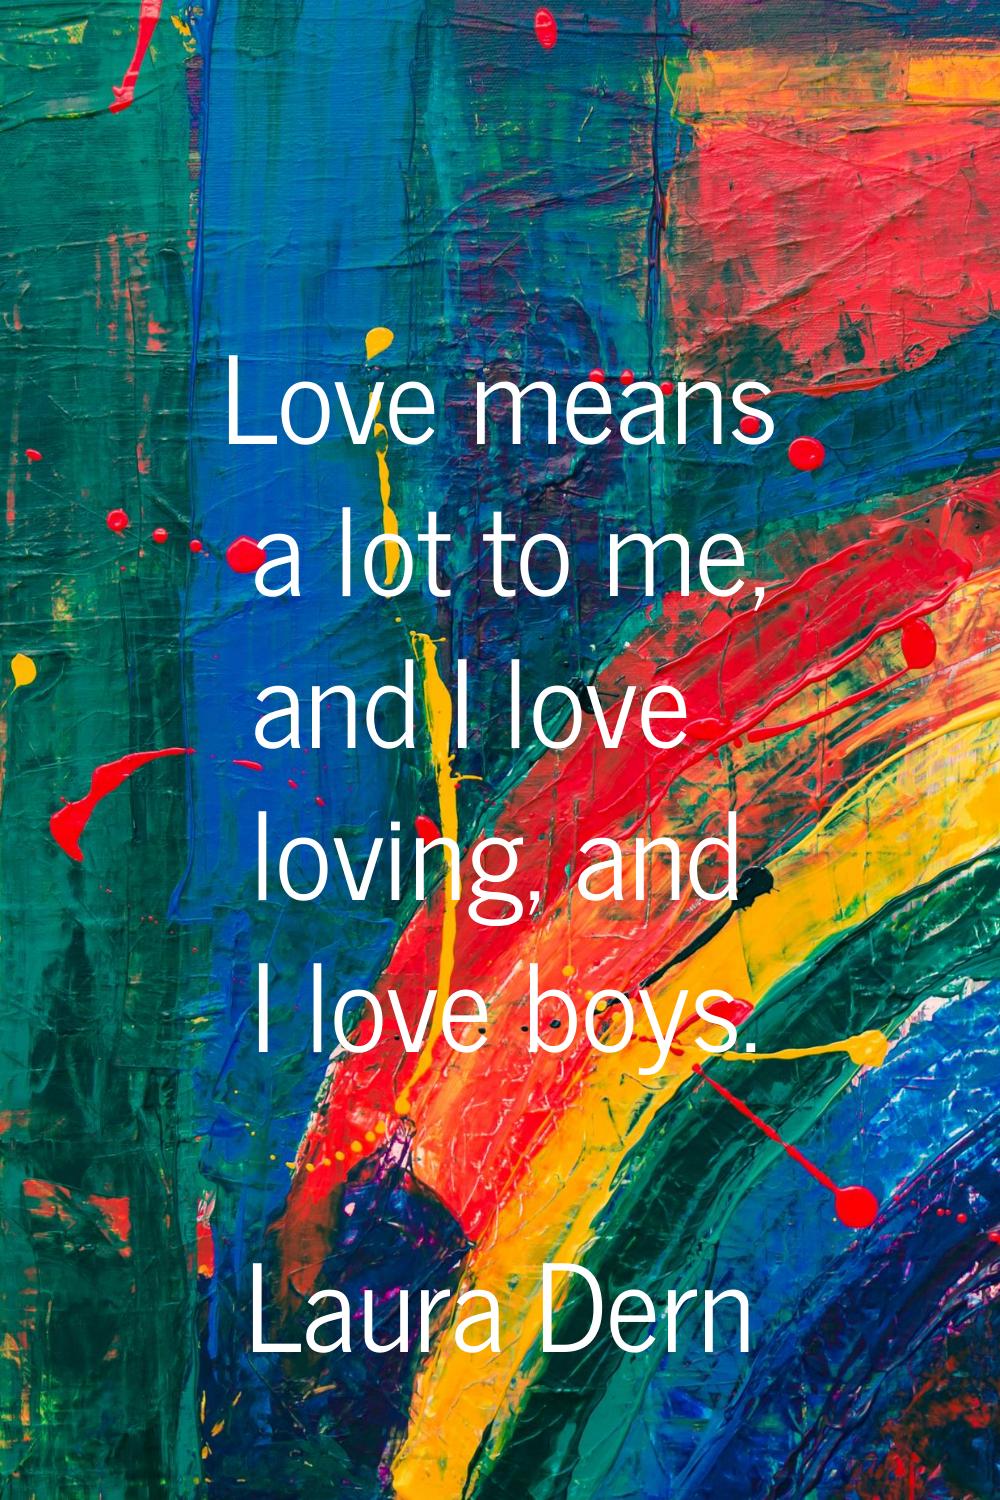 Love means a lot to me, and I love loving, and I love boys.